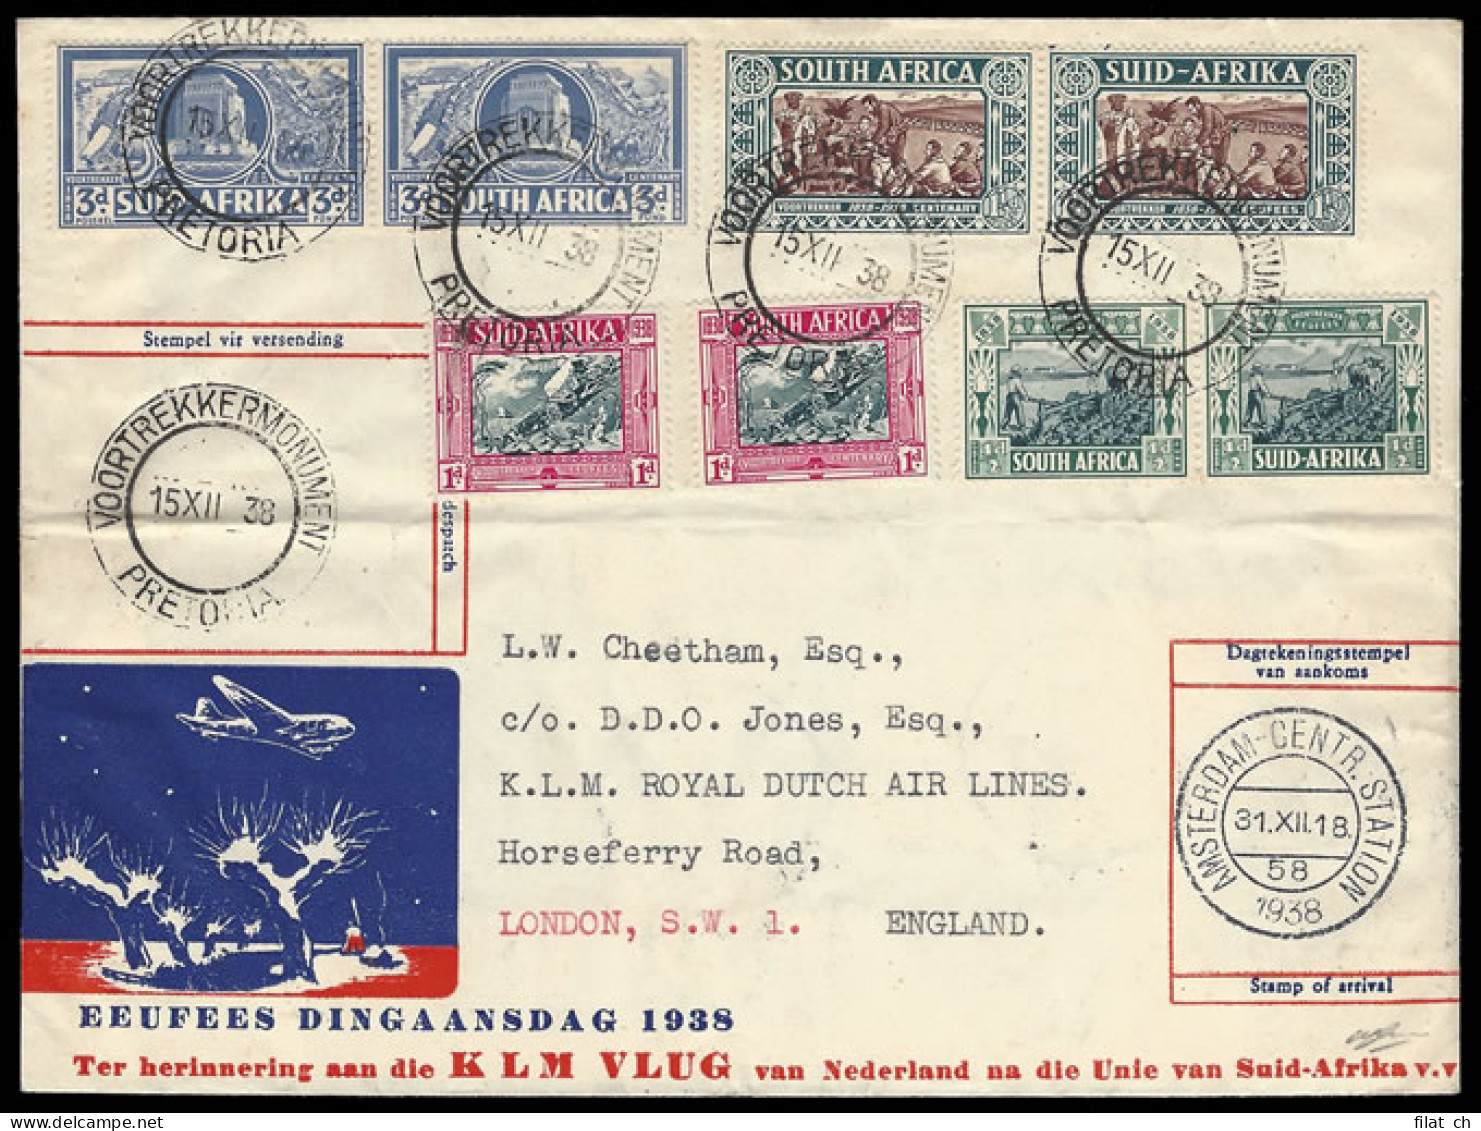 South Africa 1938 KLM Dingaan's Day Voortrekker Monument Flights - Airmail